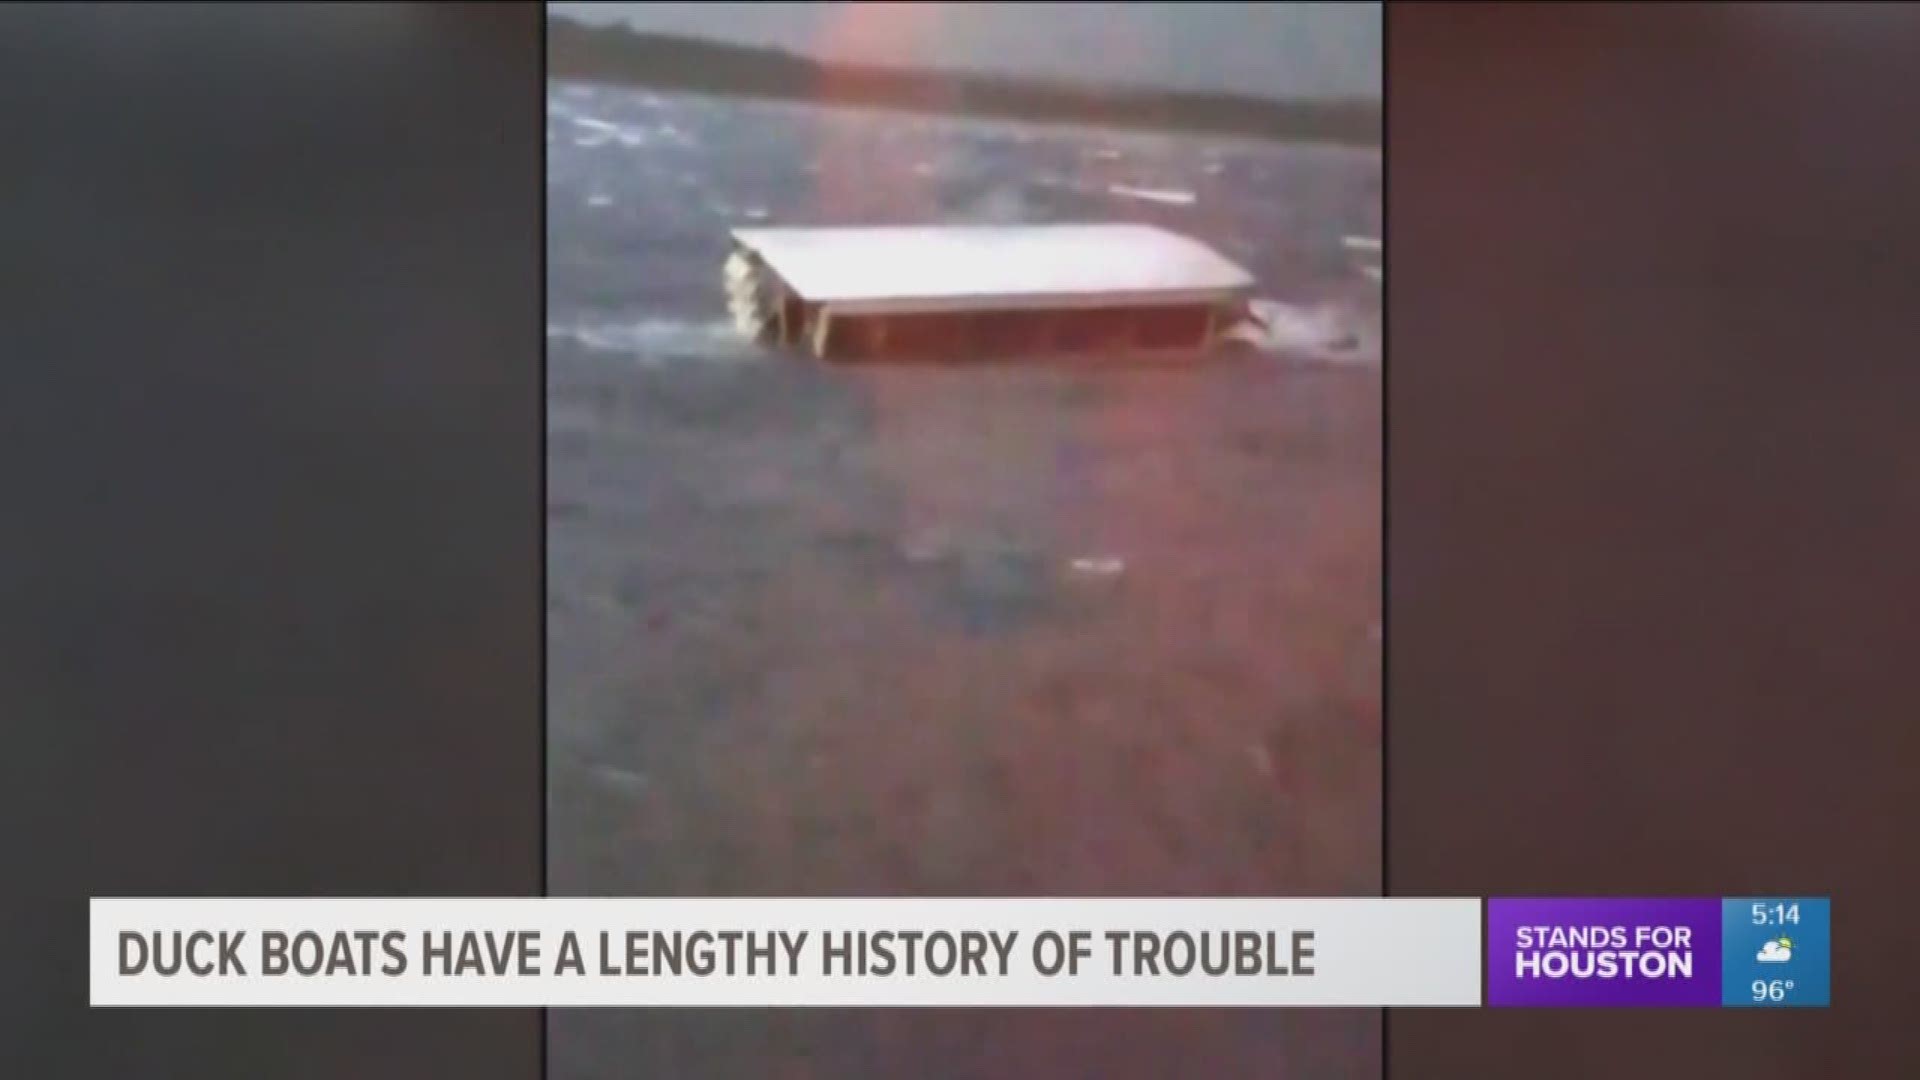 Duck boats ferry hundreds every year through lakes across the U.S. But Thursday, it was a tragic ending to one of those tours on Table Rock Lake in Missouri.